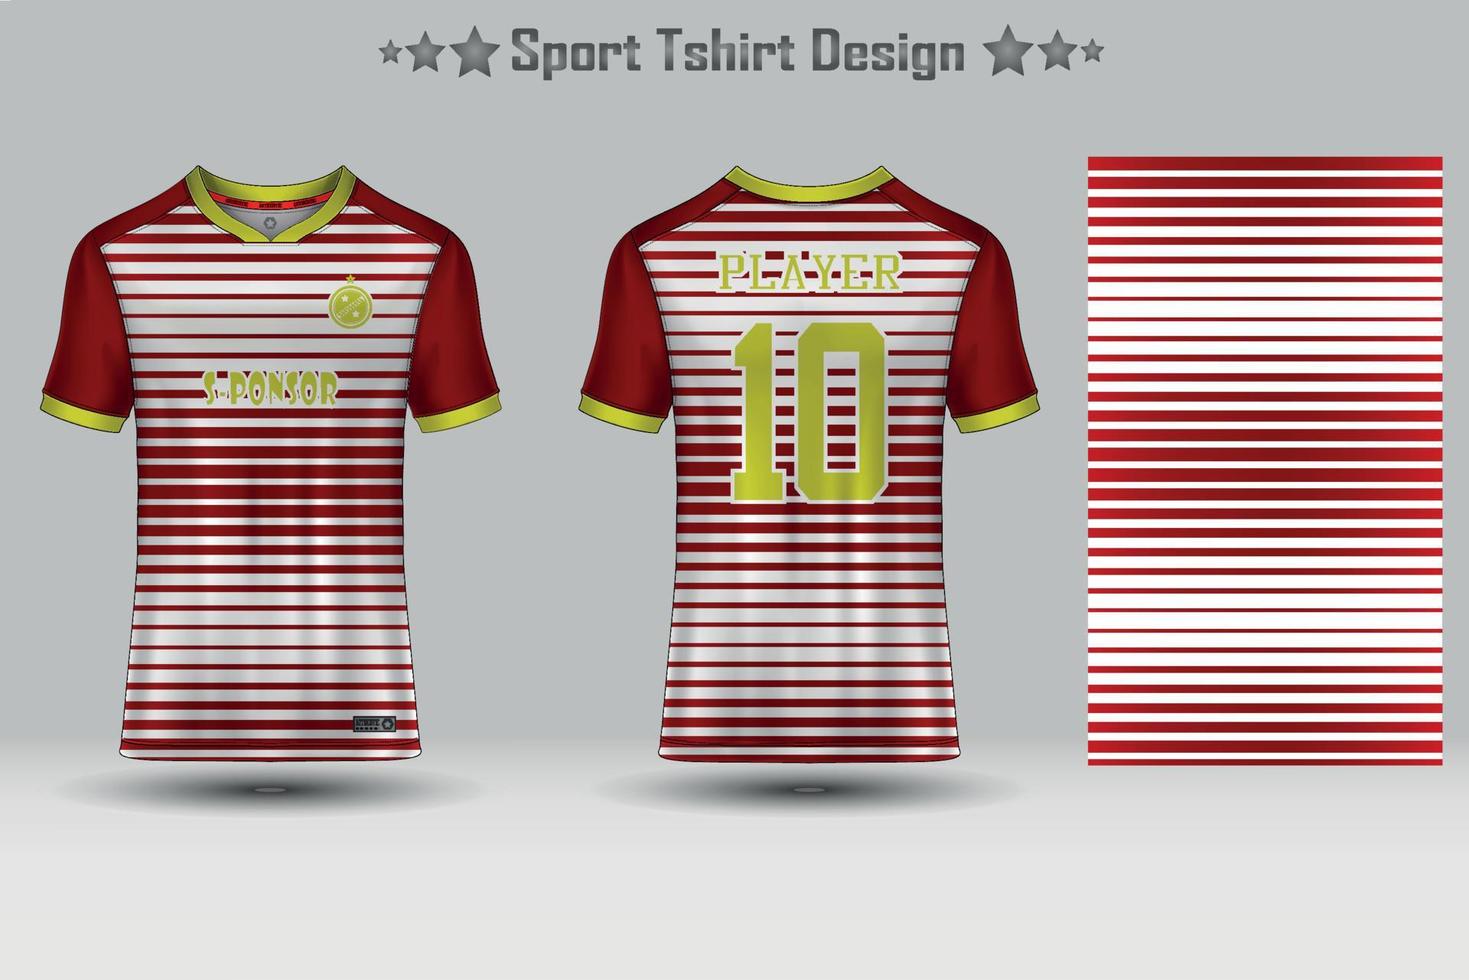 Football jersey mockup and sport jersey mockup with abstract geometric pattern vector